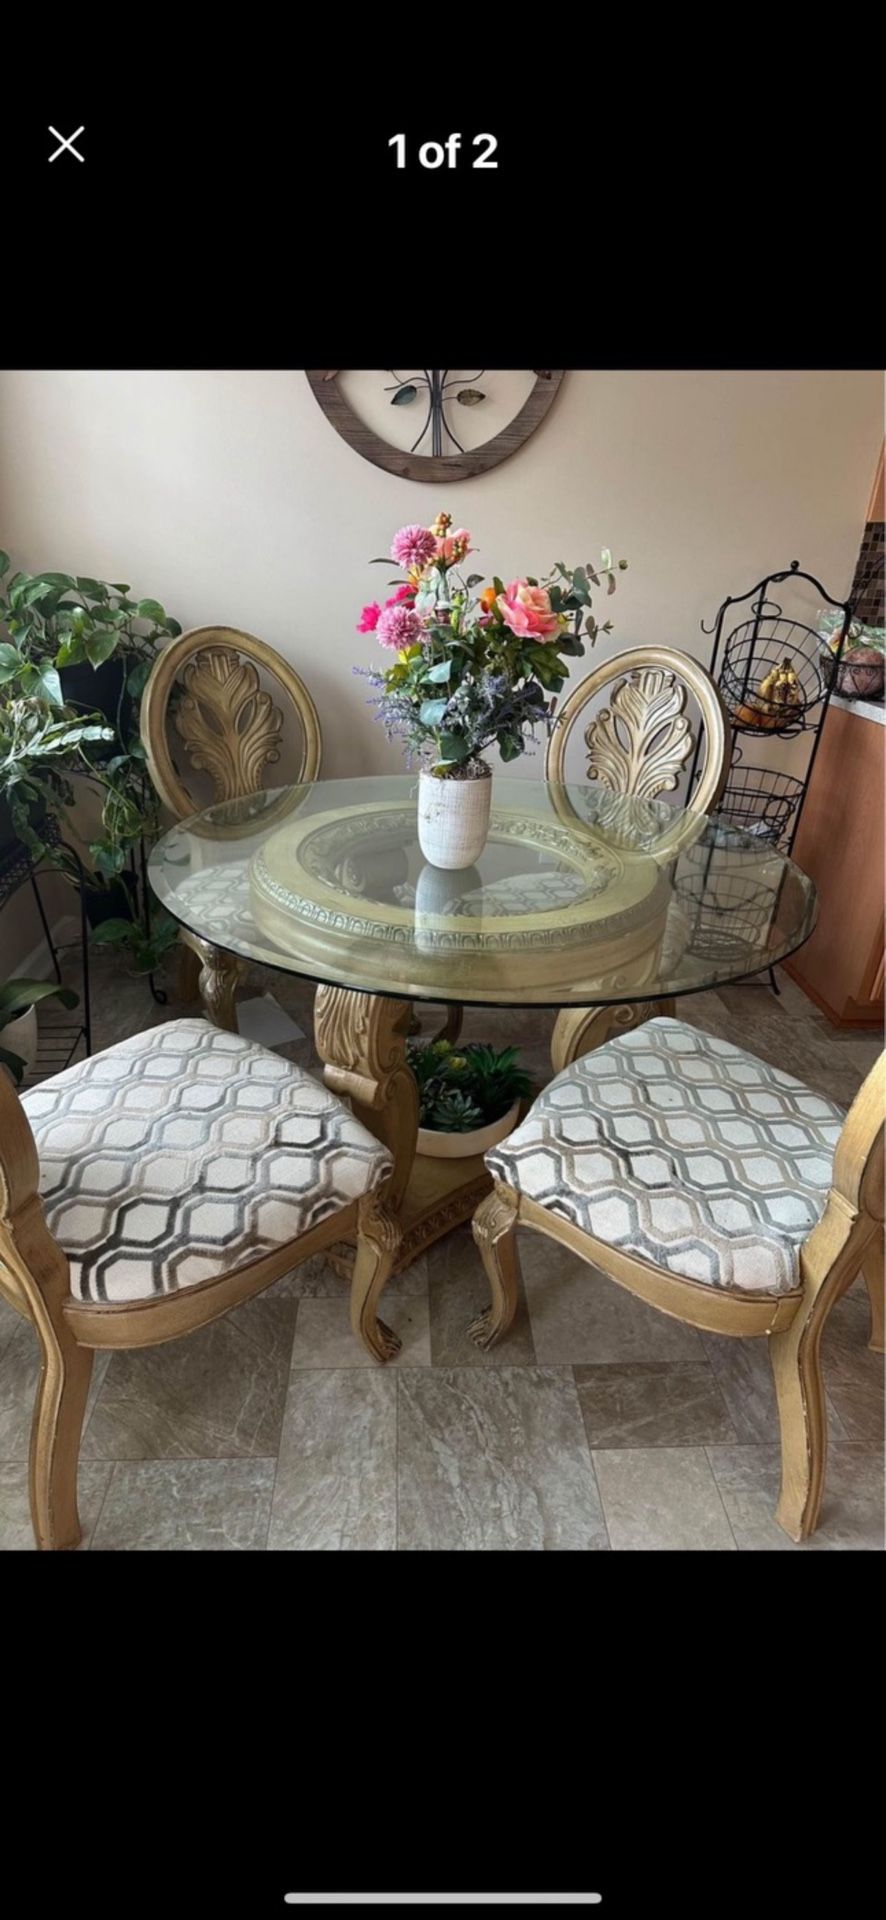 Beautiful Wood Nook Round Table And Chairs  Leaf Design. 60 Inch Round Glass. The Glass Shown Is 48 Inch. We Are Selling Table With The 60 Inch Glass 